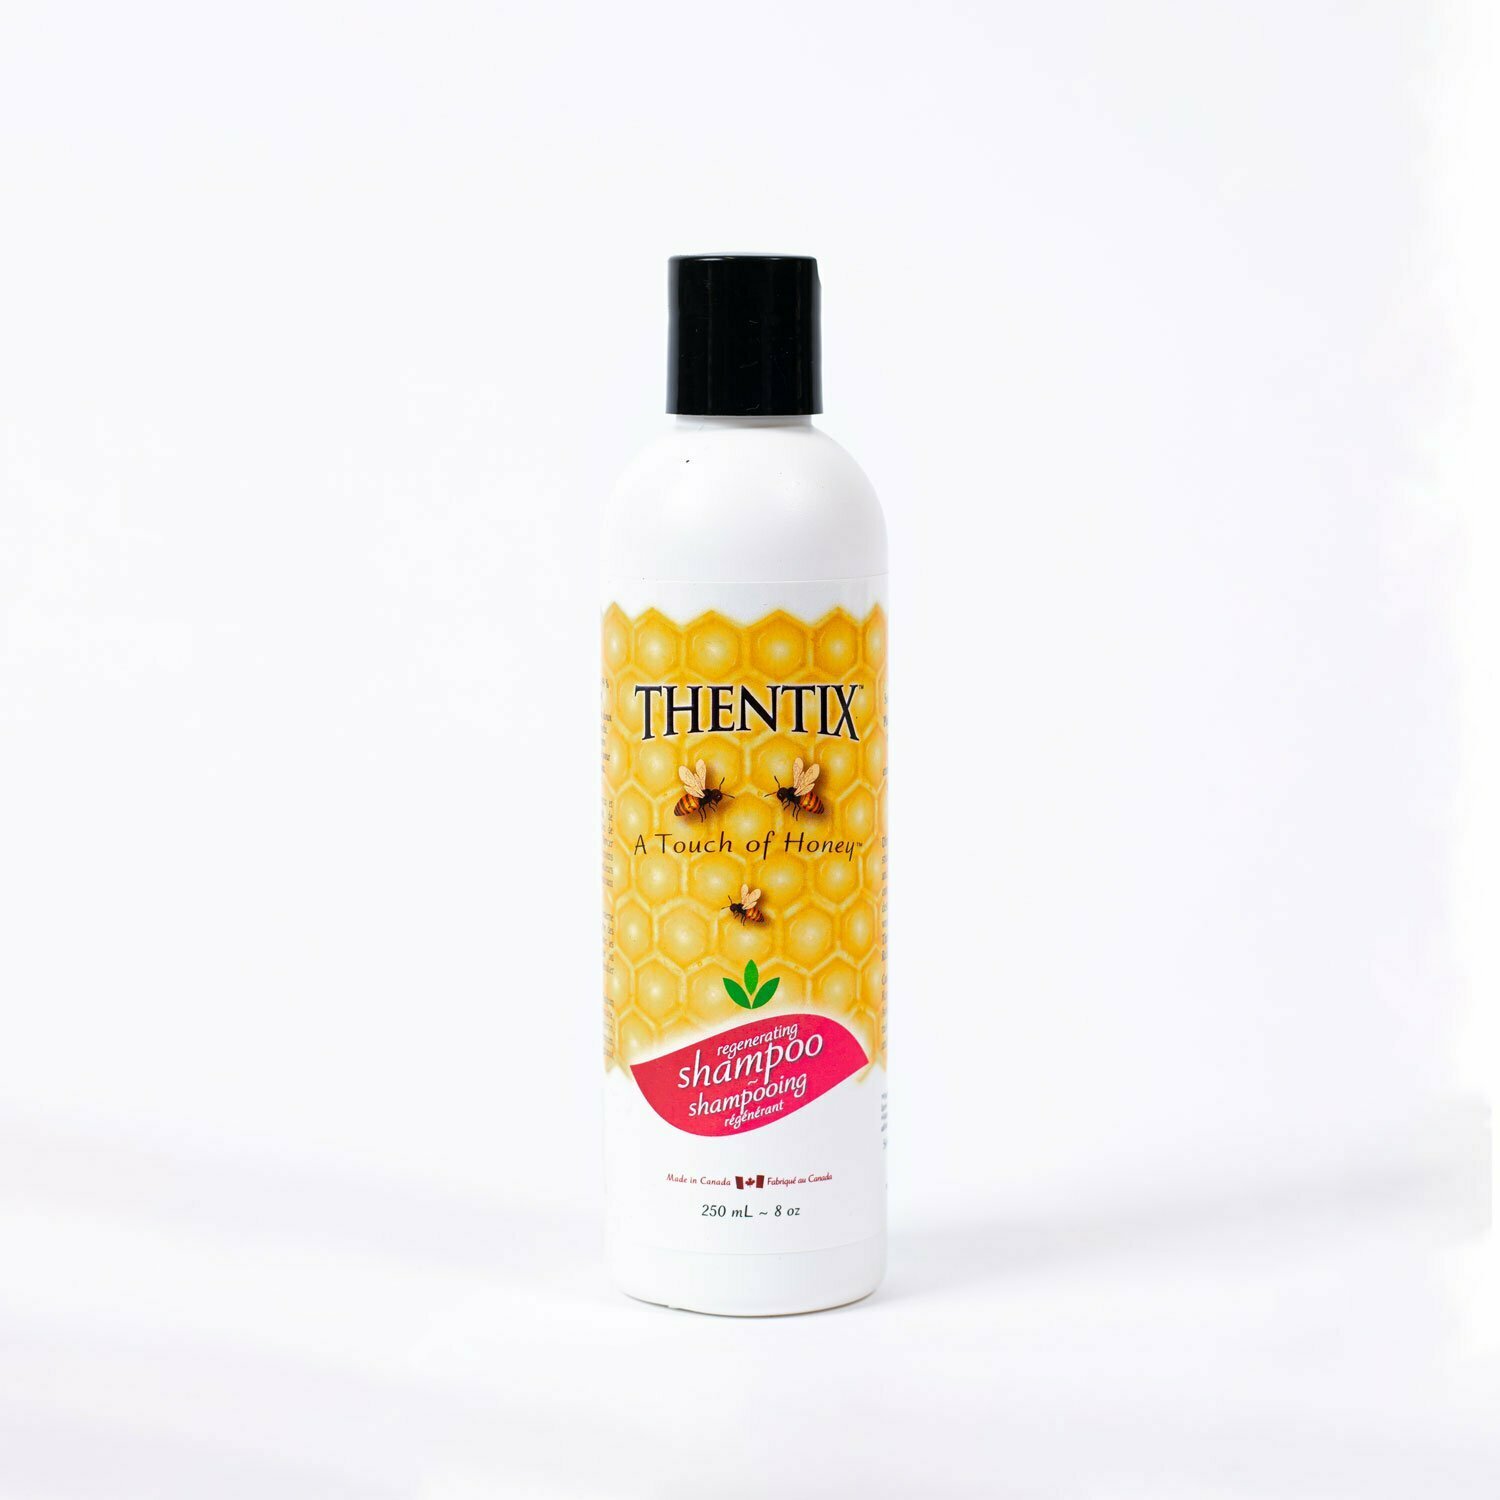 Safe and plant-based ingredients of Thentix Shampoo gives a natural nourishment to your hair. Thentix Shampoo reduces split ends and hair damage caused by over-drying.